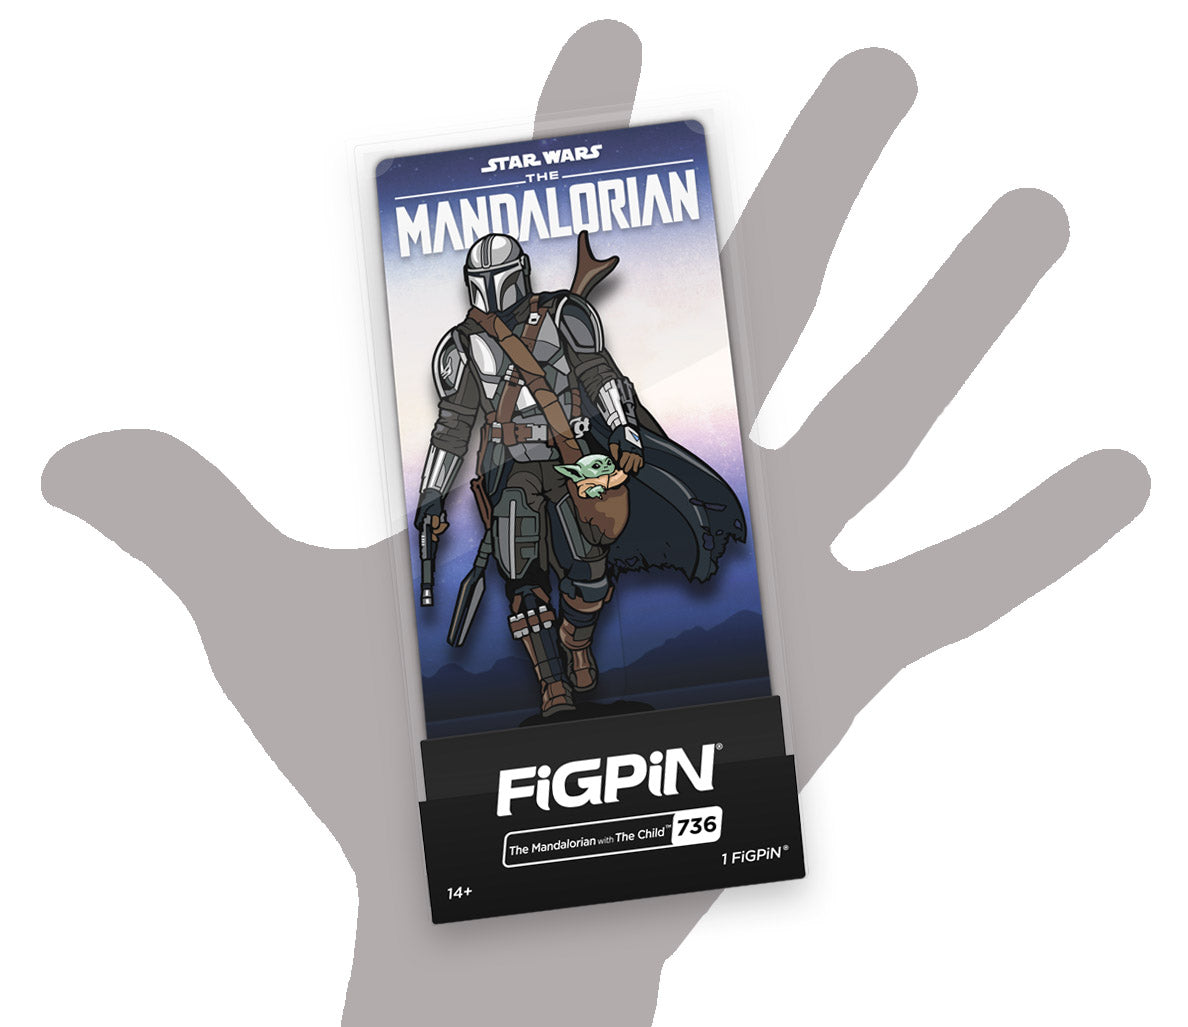 FiGPiN The Mandalorian with The Child (736) Collectable Enamel Pin MK3ADPAVN3 |27903|